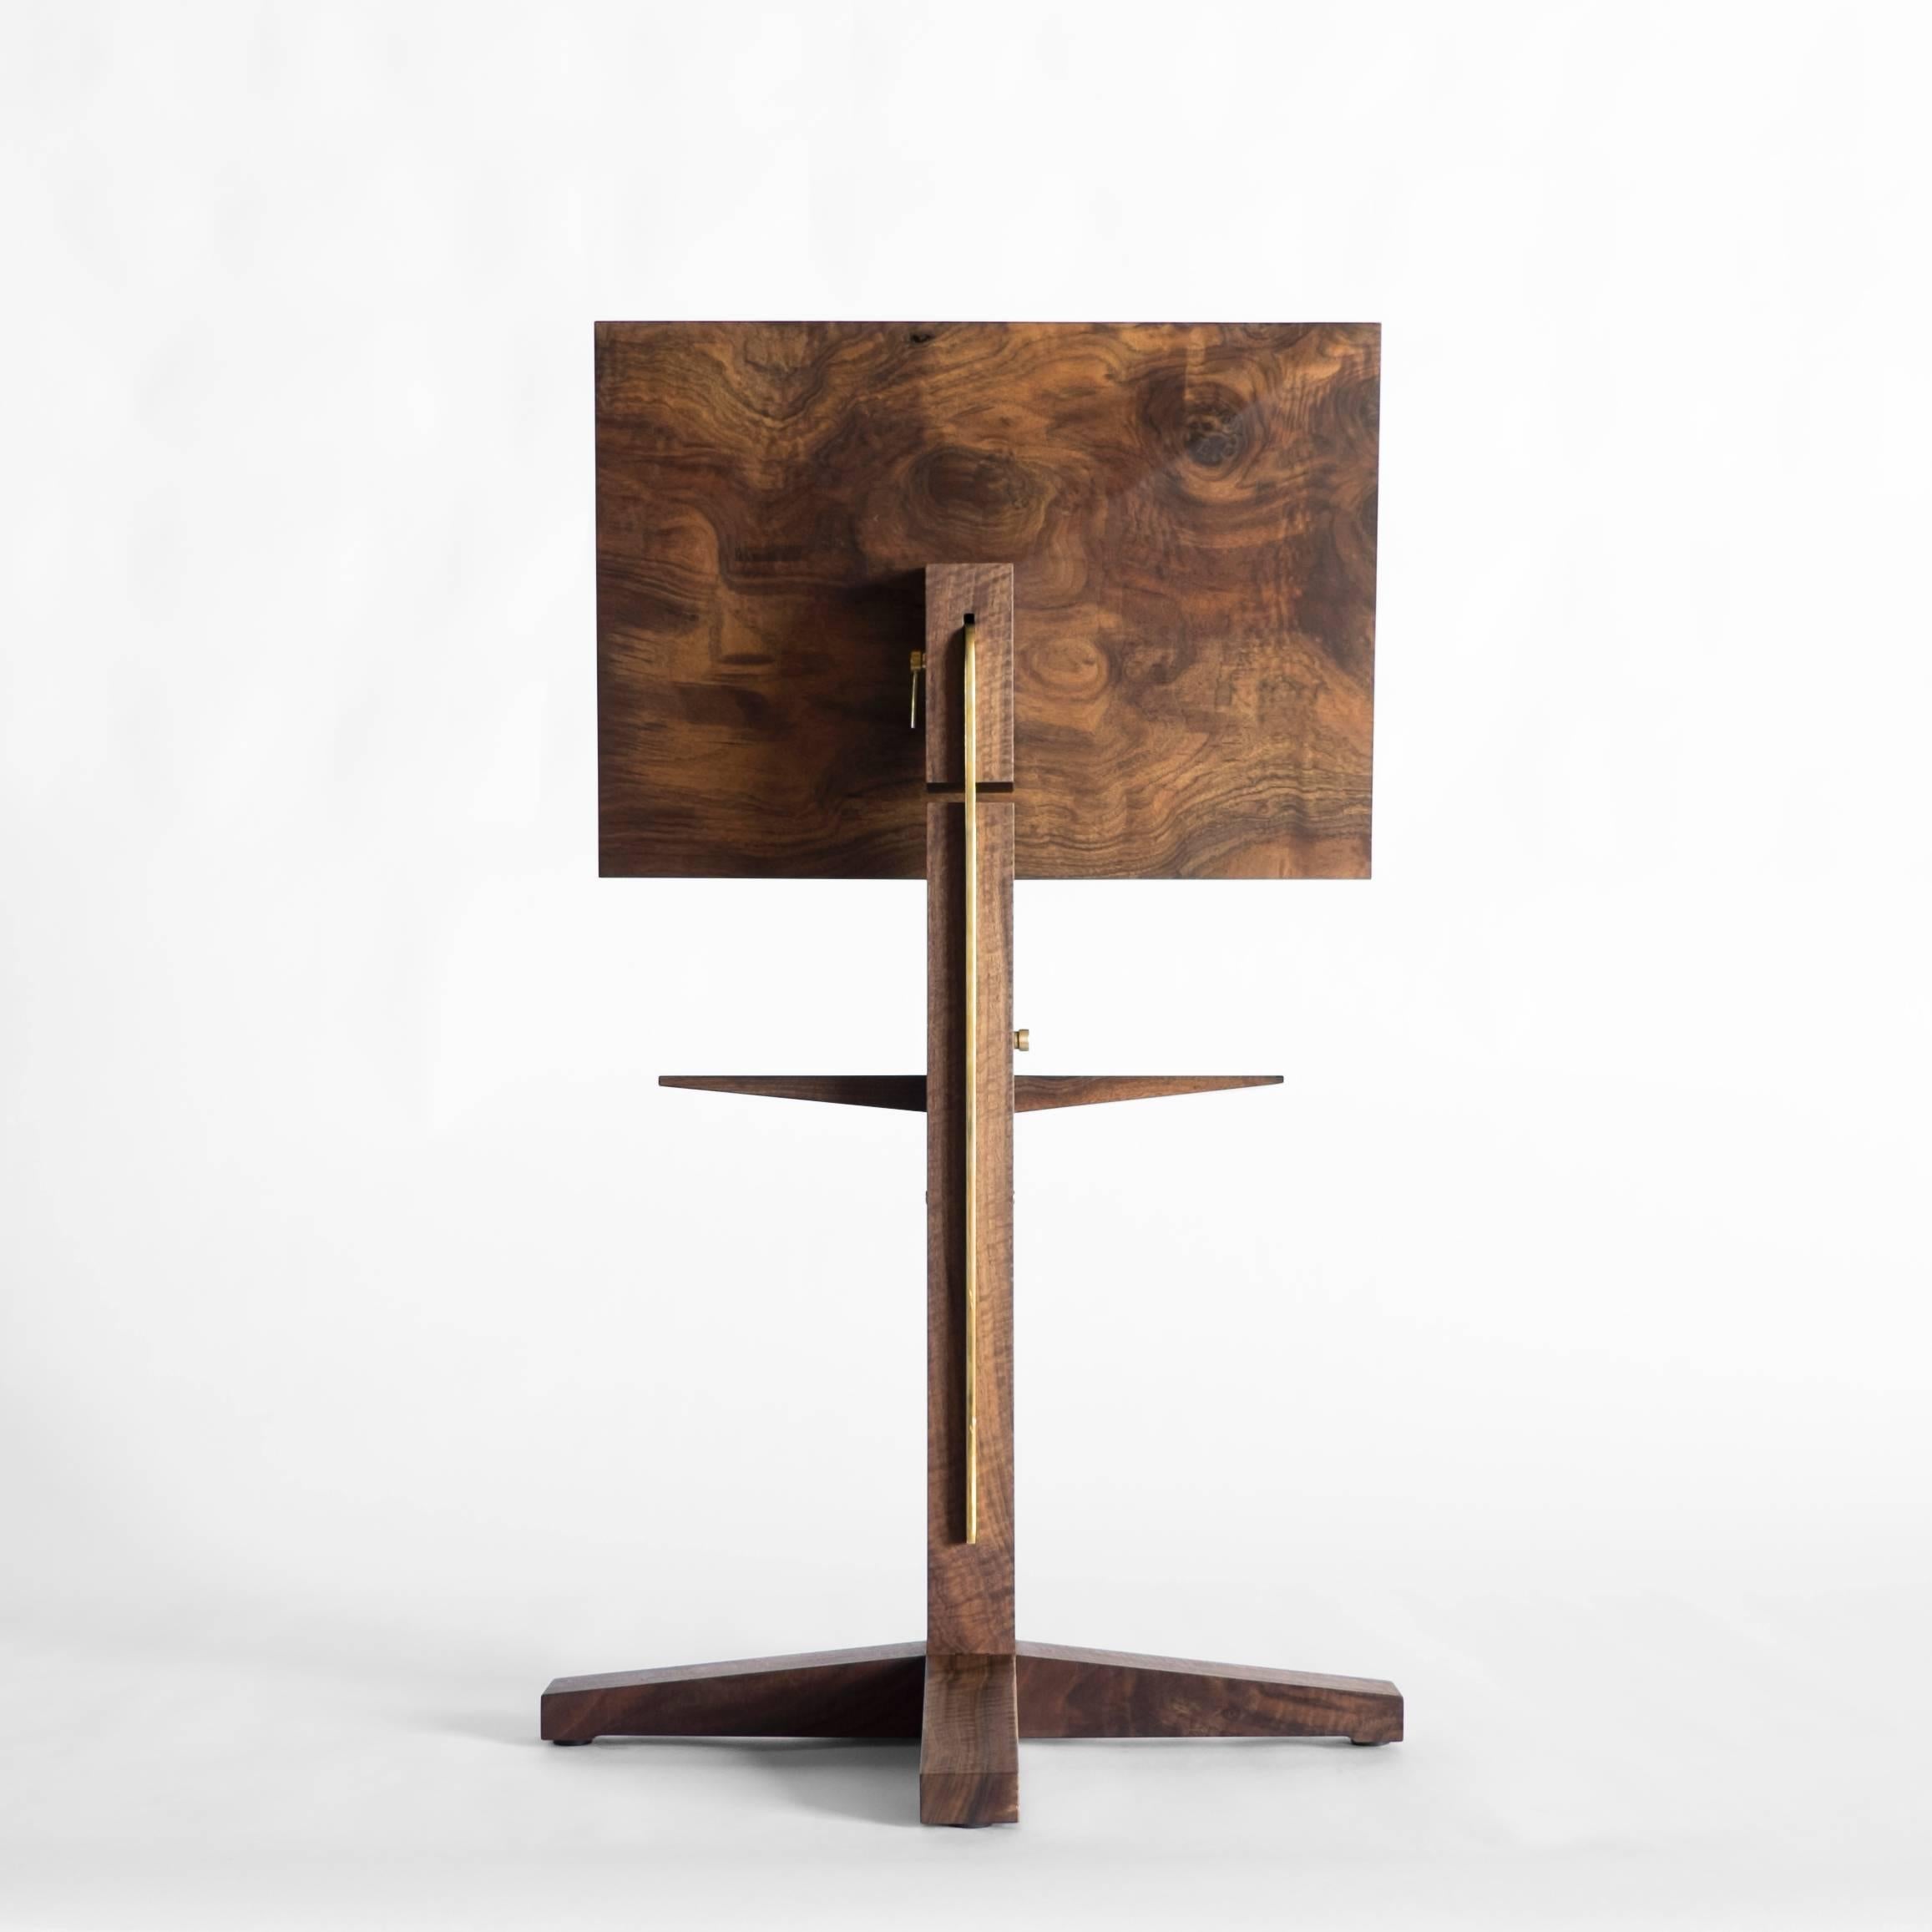 Inspired by Soviet Constructivism, this modern, sculpted California Walnut music stand by Taylor Donsker features a solid wood design with traditional hand joinery and polished brass details.  Custom, polished brass hardware allows for height and